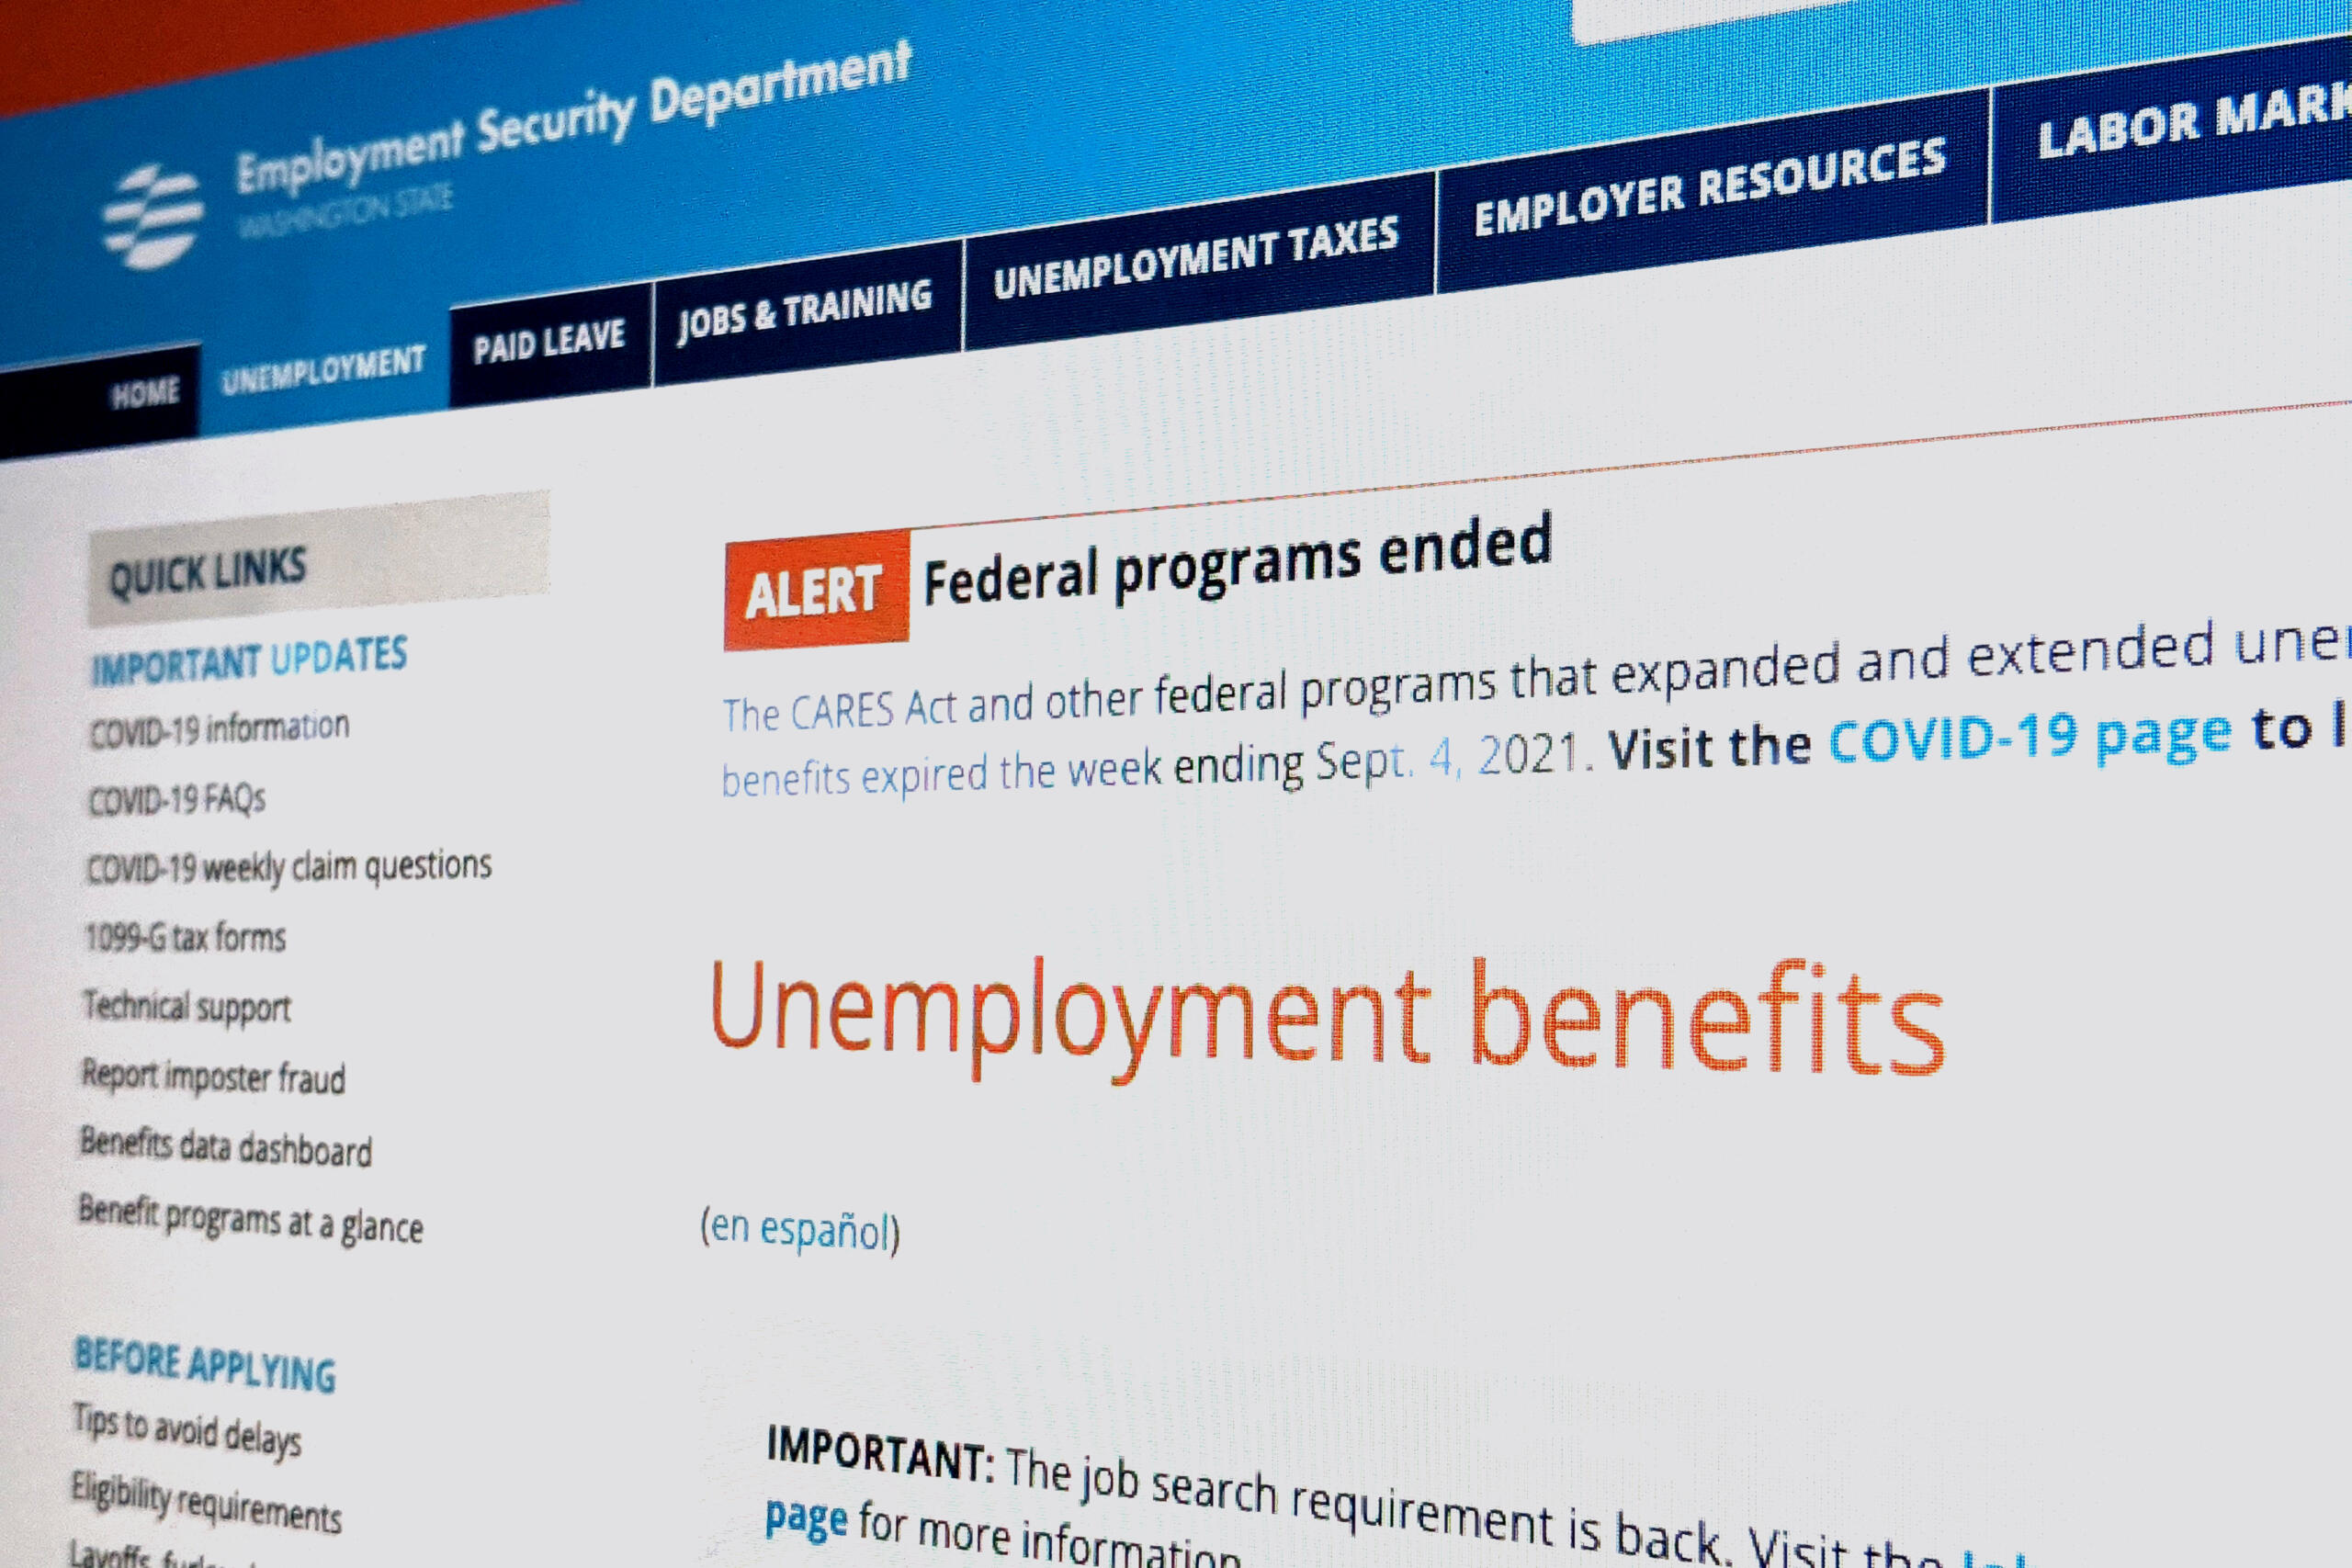 The homepage of the Washington Employment Security Department.